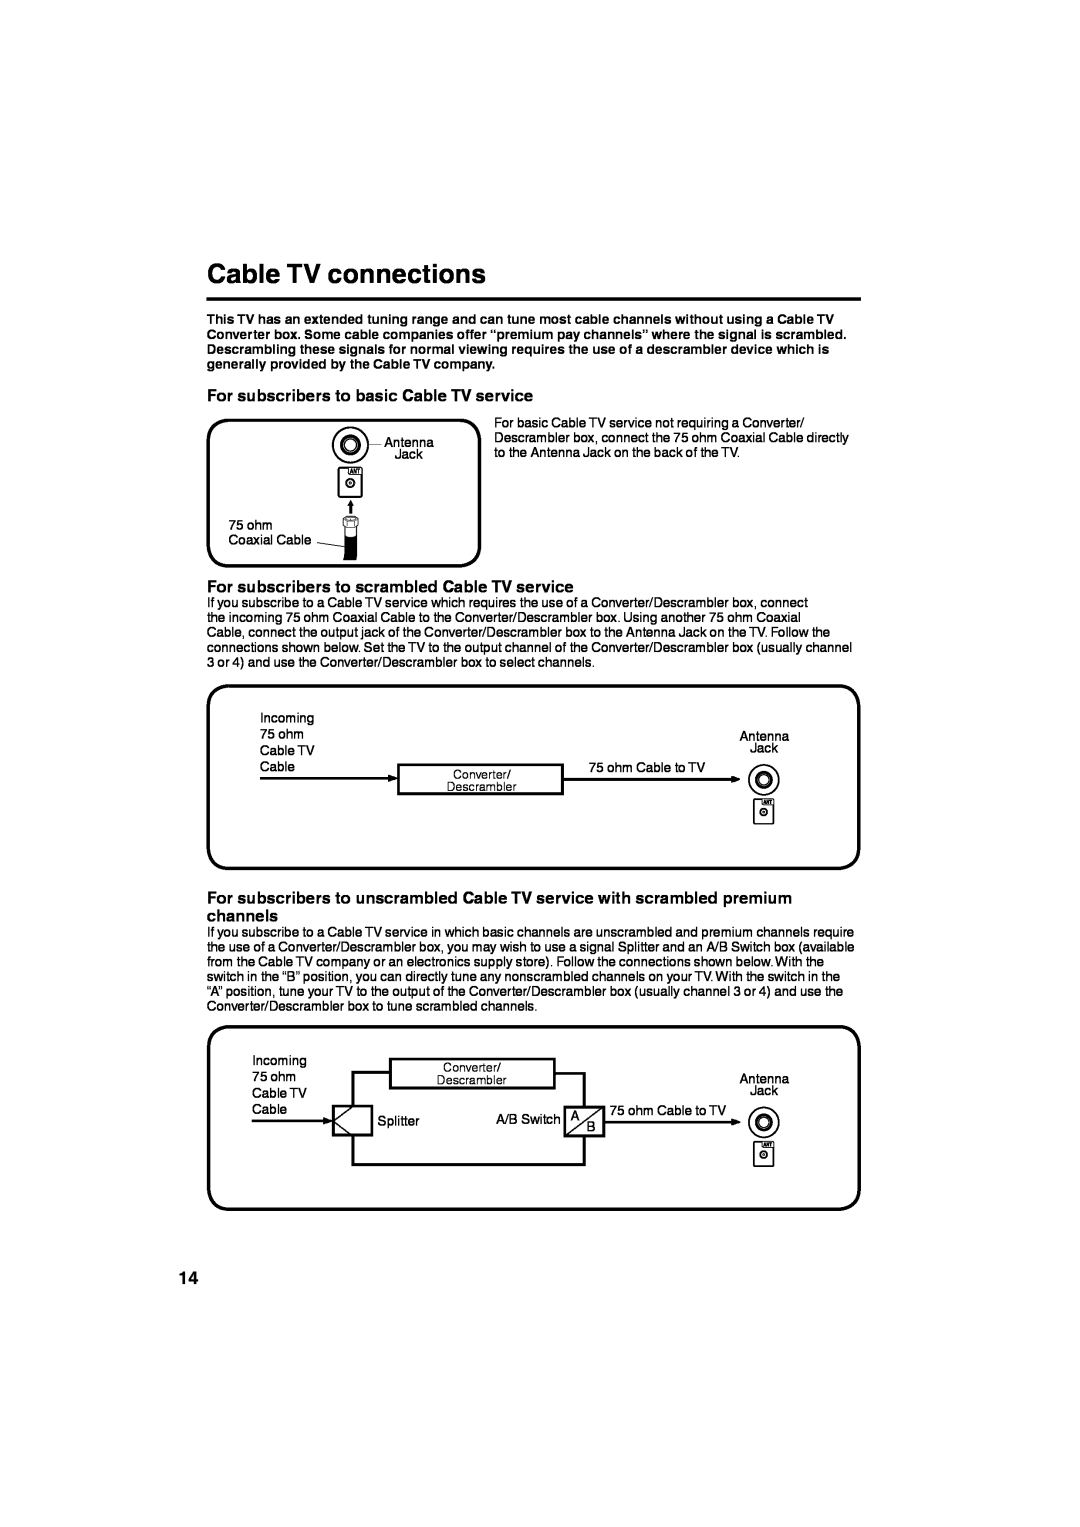 Sansui HDLCDVD265 owner manual Cable TV connections, For subscribers to basic Cable TV service 